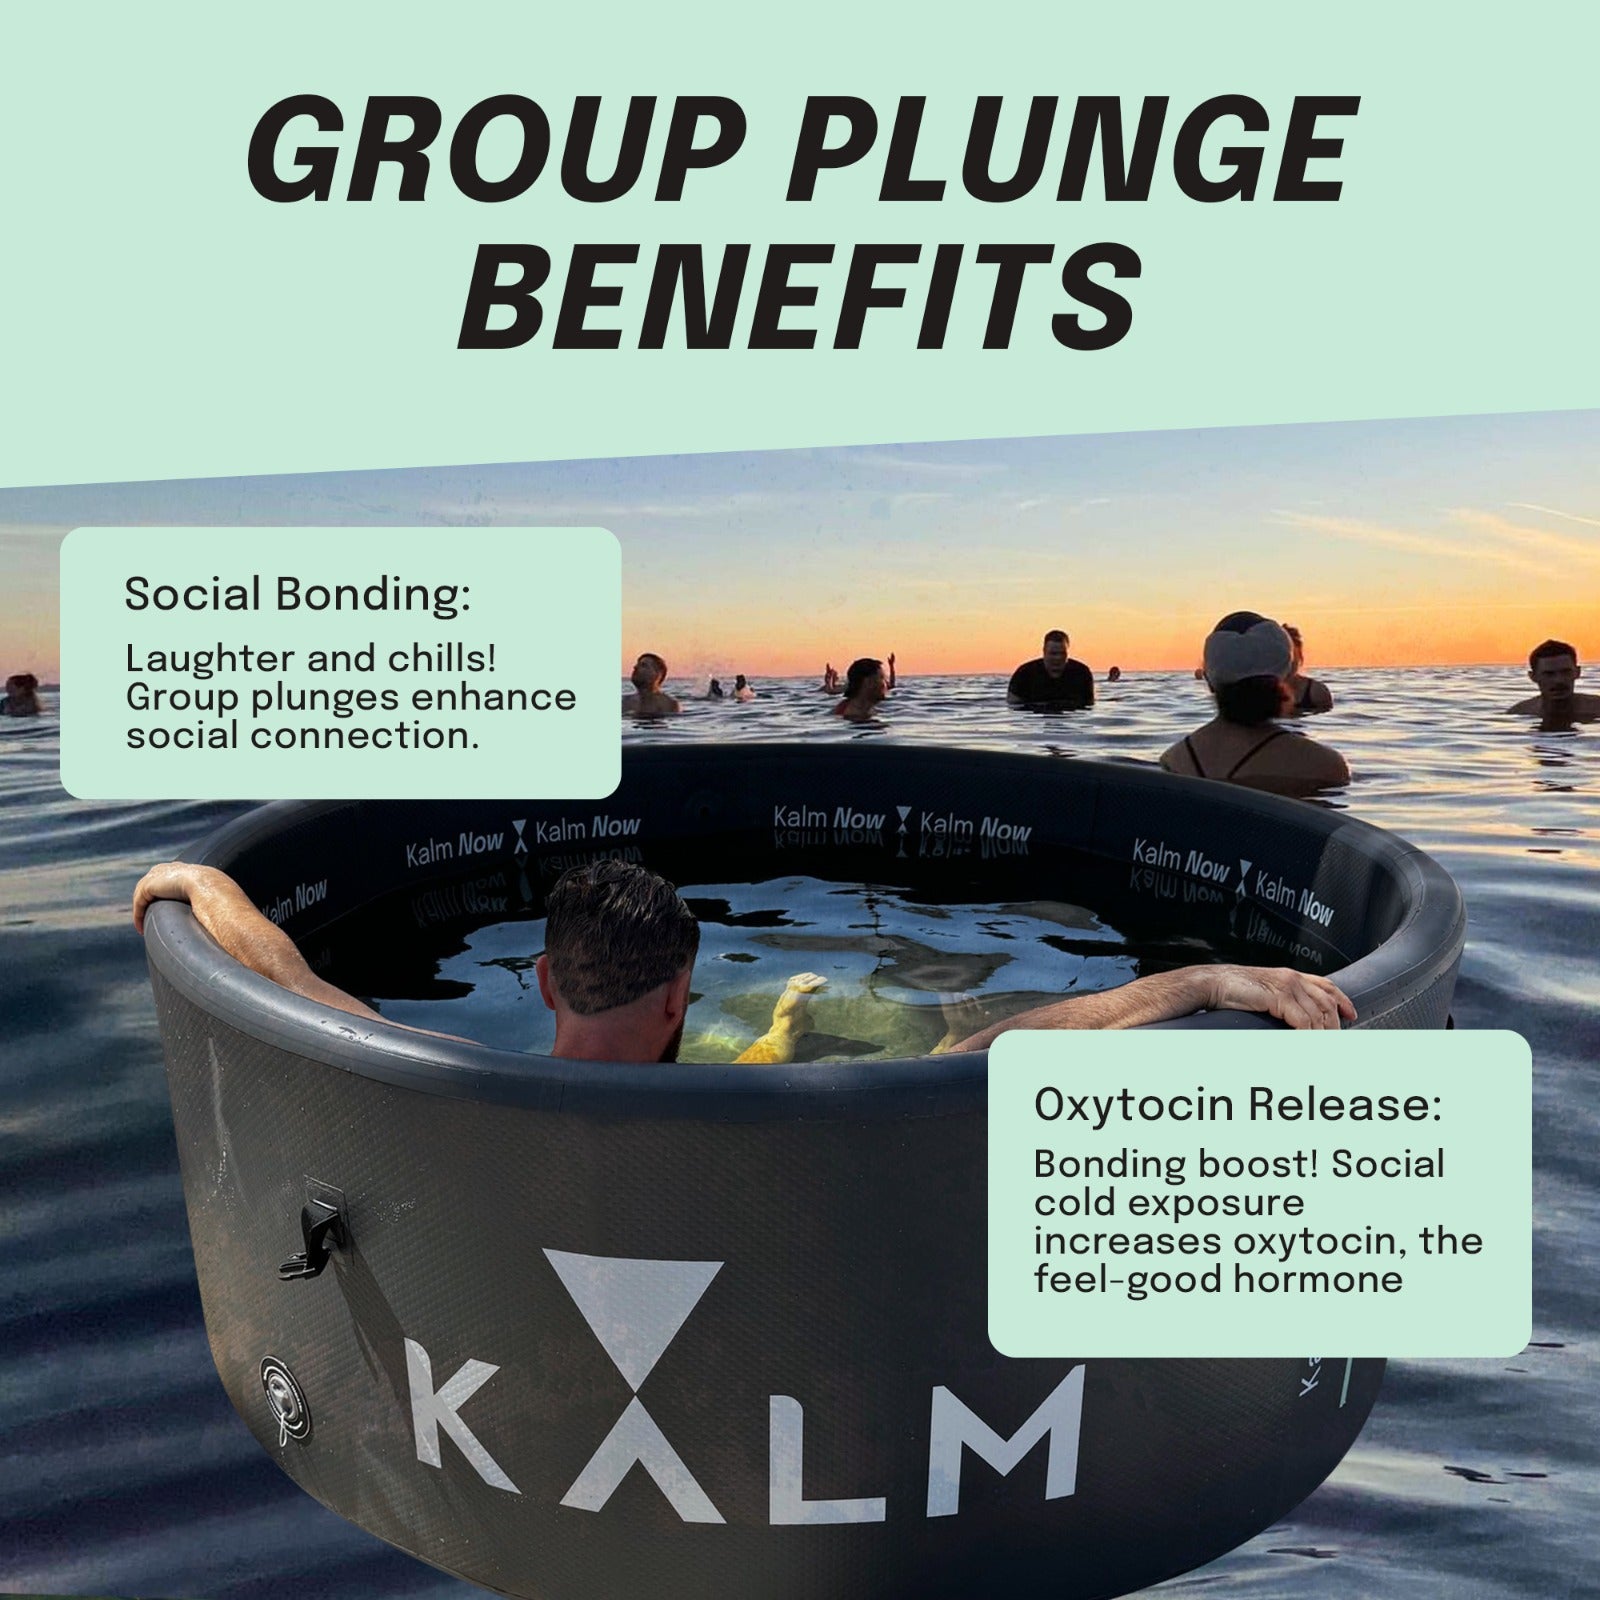 Kalm NordicNest Group Tub for Cold Plunge and Ice Baths